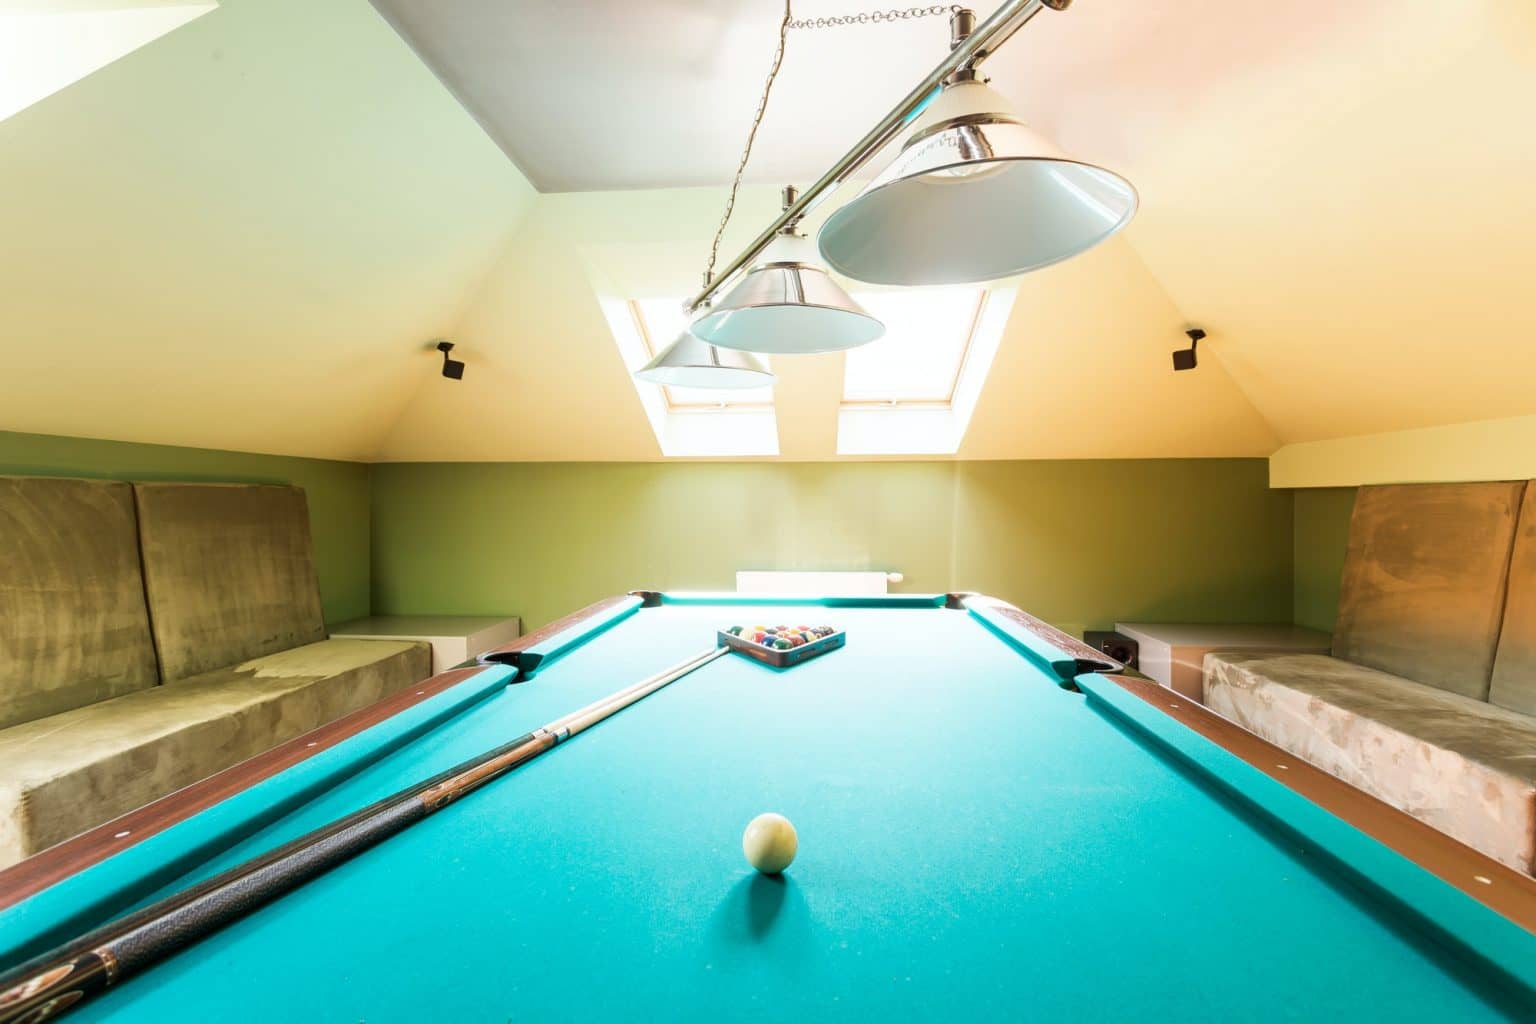 Entertainment attic room with a pool table in Newhall